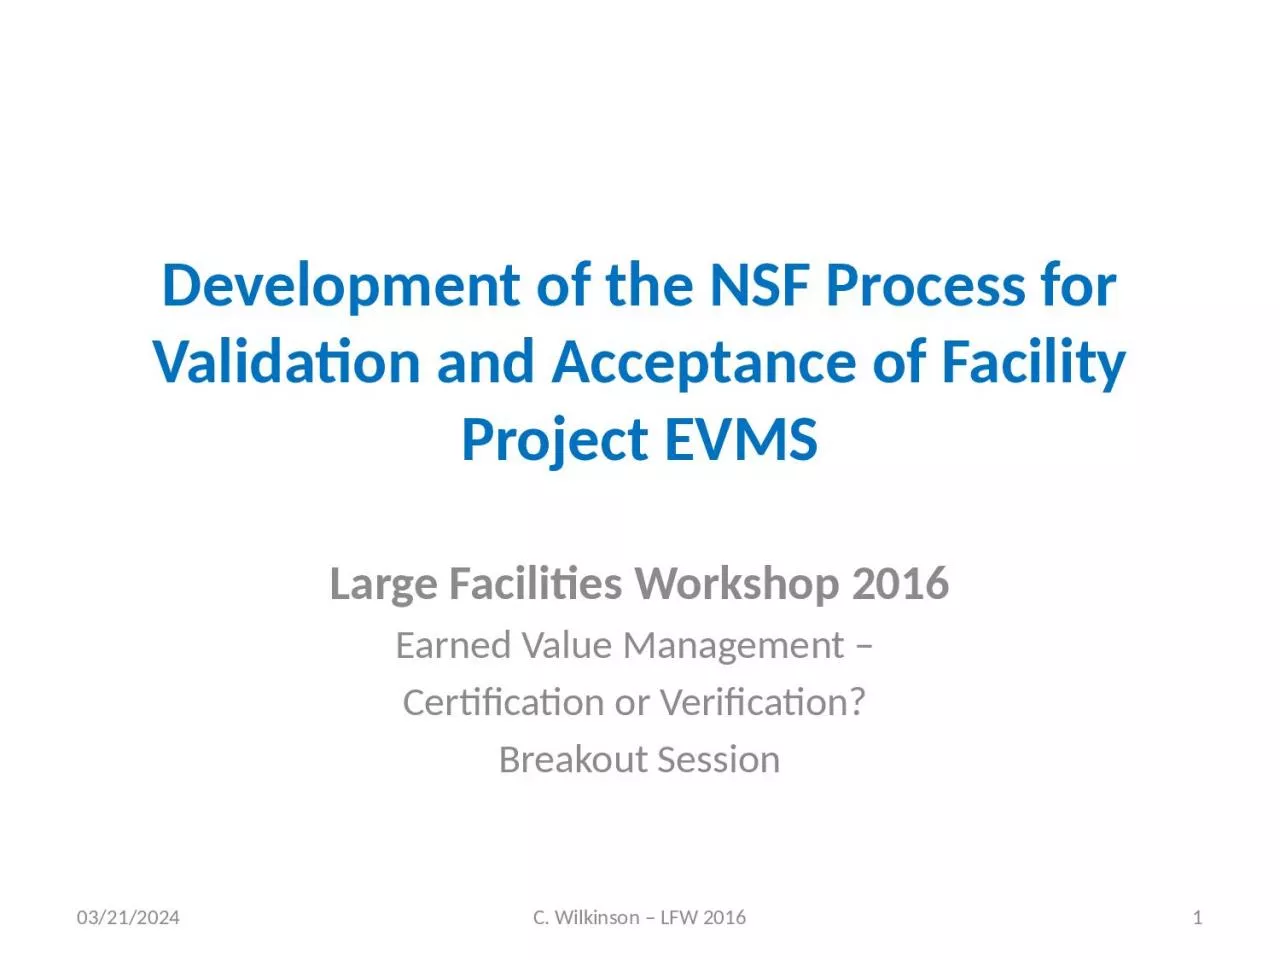 Development of the NSF Process for Validation and Acceptance of Facility Project EVMS